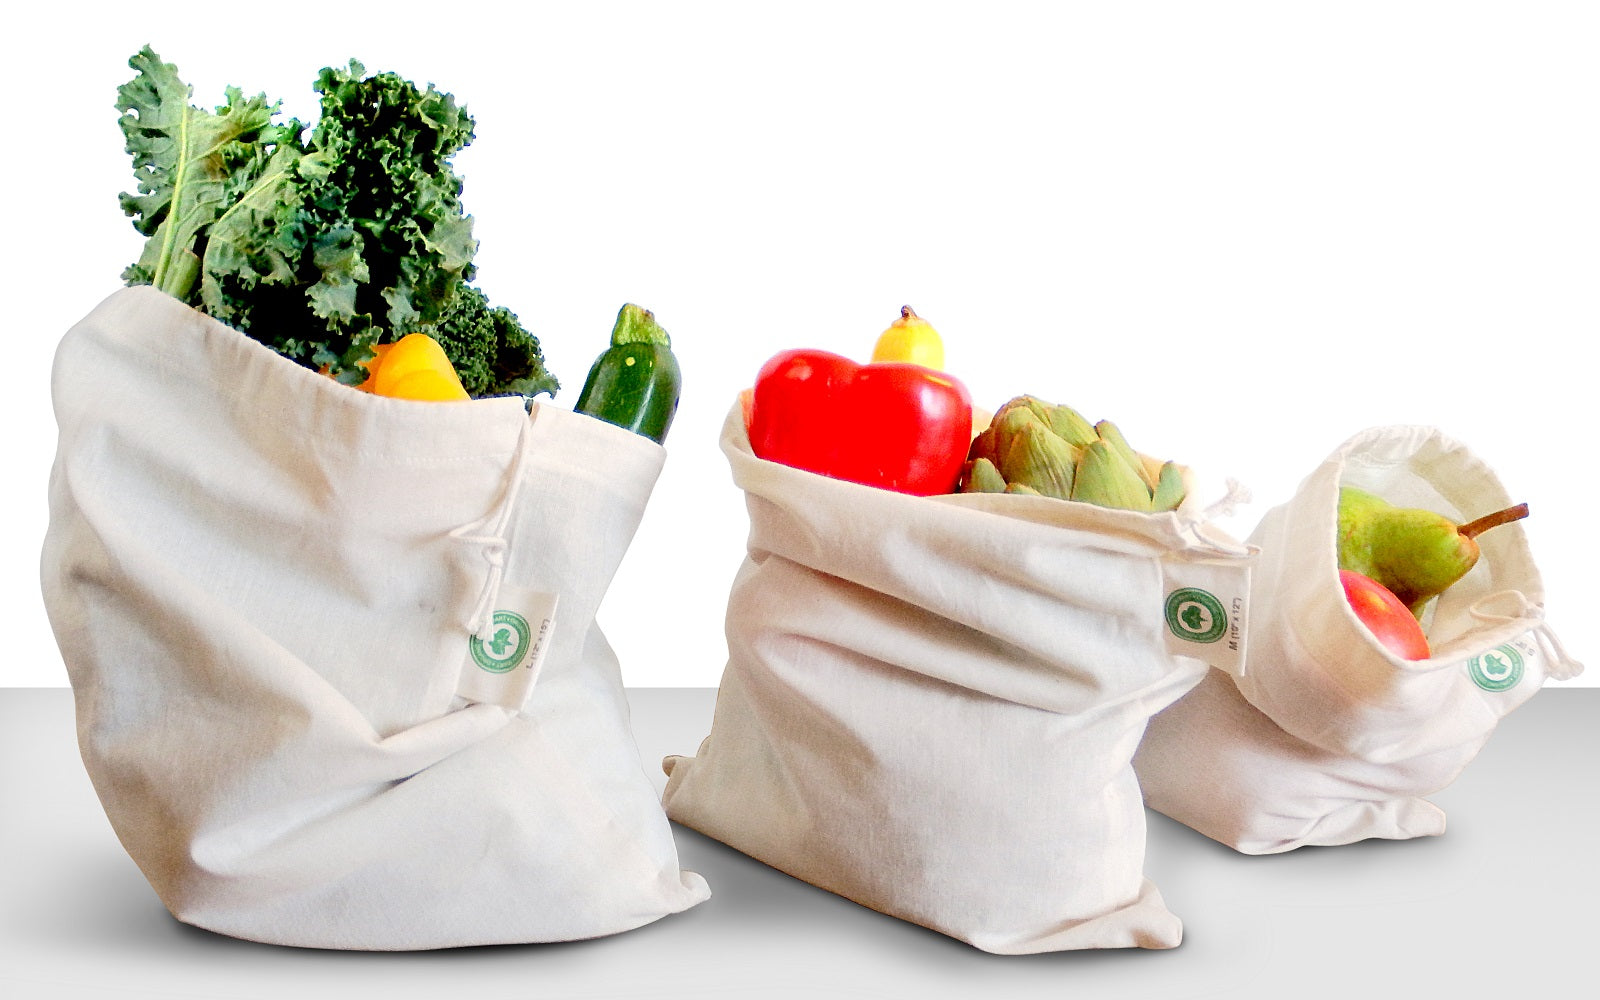 Girl Holding Mesh Shopping Bag and Cotton Shopper with Vegetables without  Plastic Bags at Farmers Market. Zero Waste, Plastic Free Stock Photo -  Image of fabric, banner: 159243464